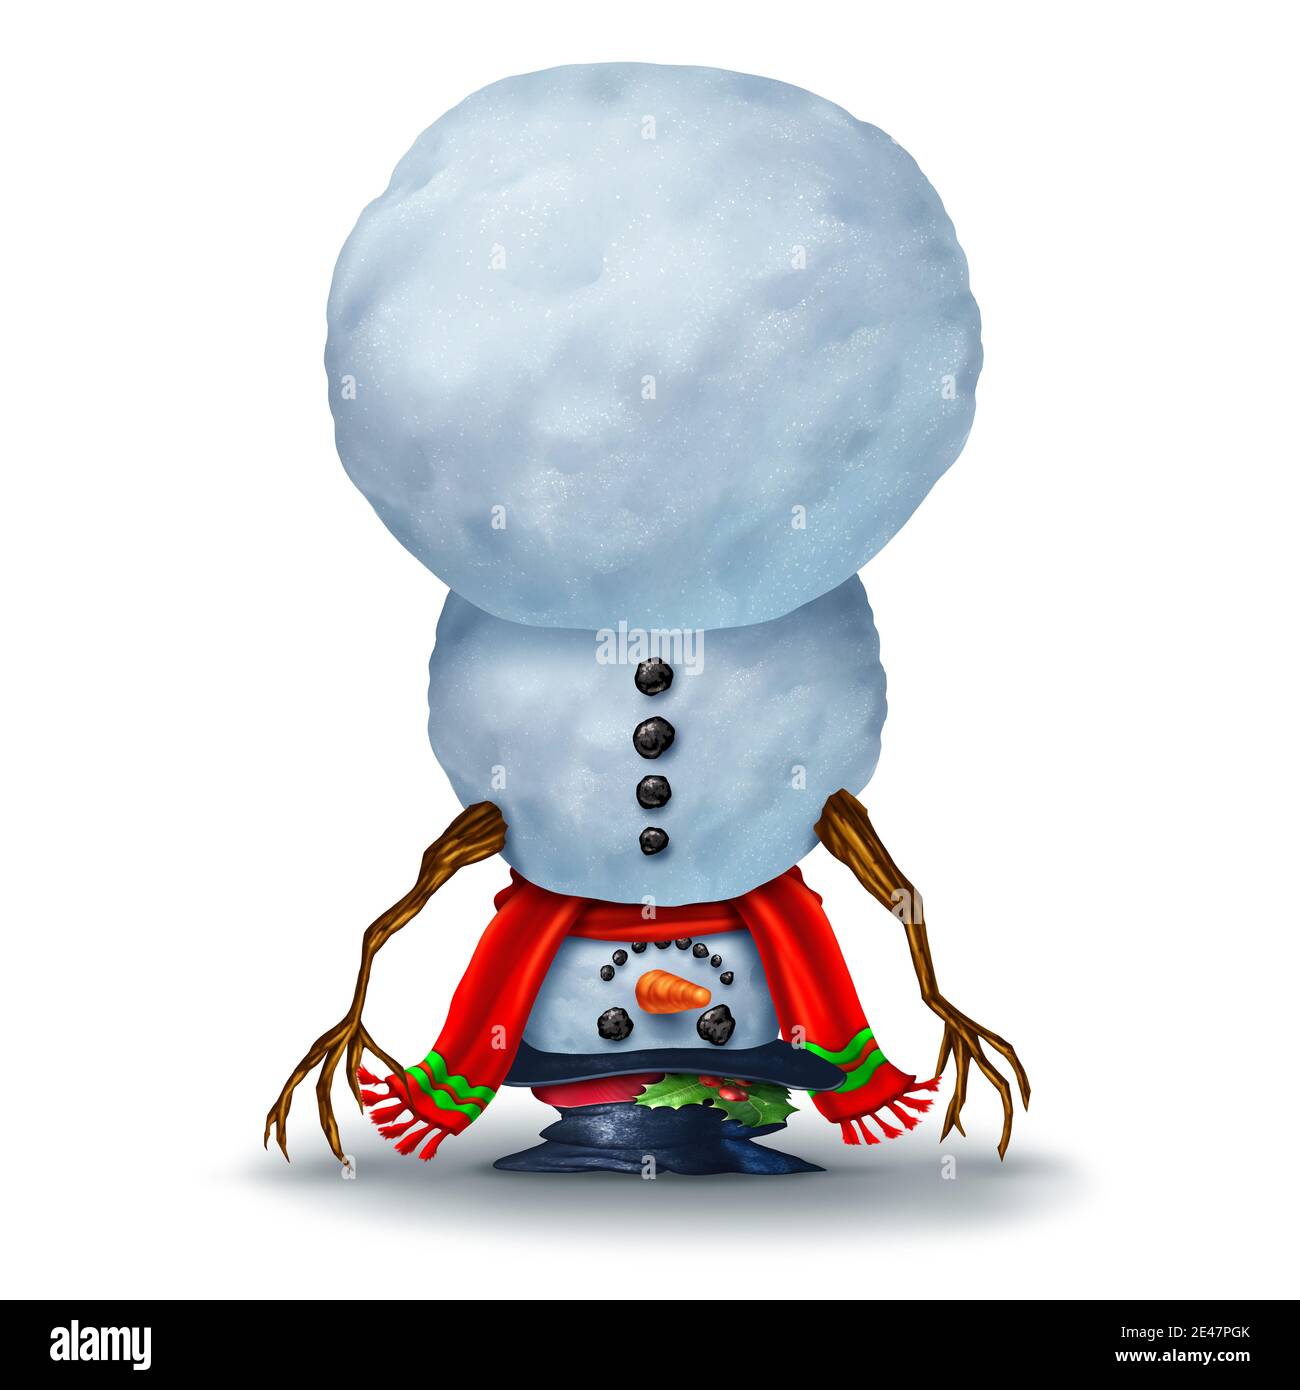 Upside down snowman character on a white background as a funny winter day activity celebration and festive seasonal symbol for snowing and upsidedown. Stock Photo